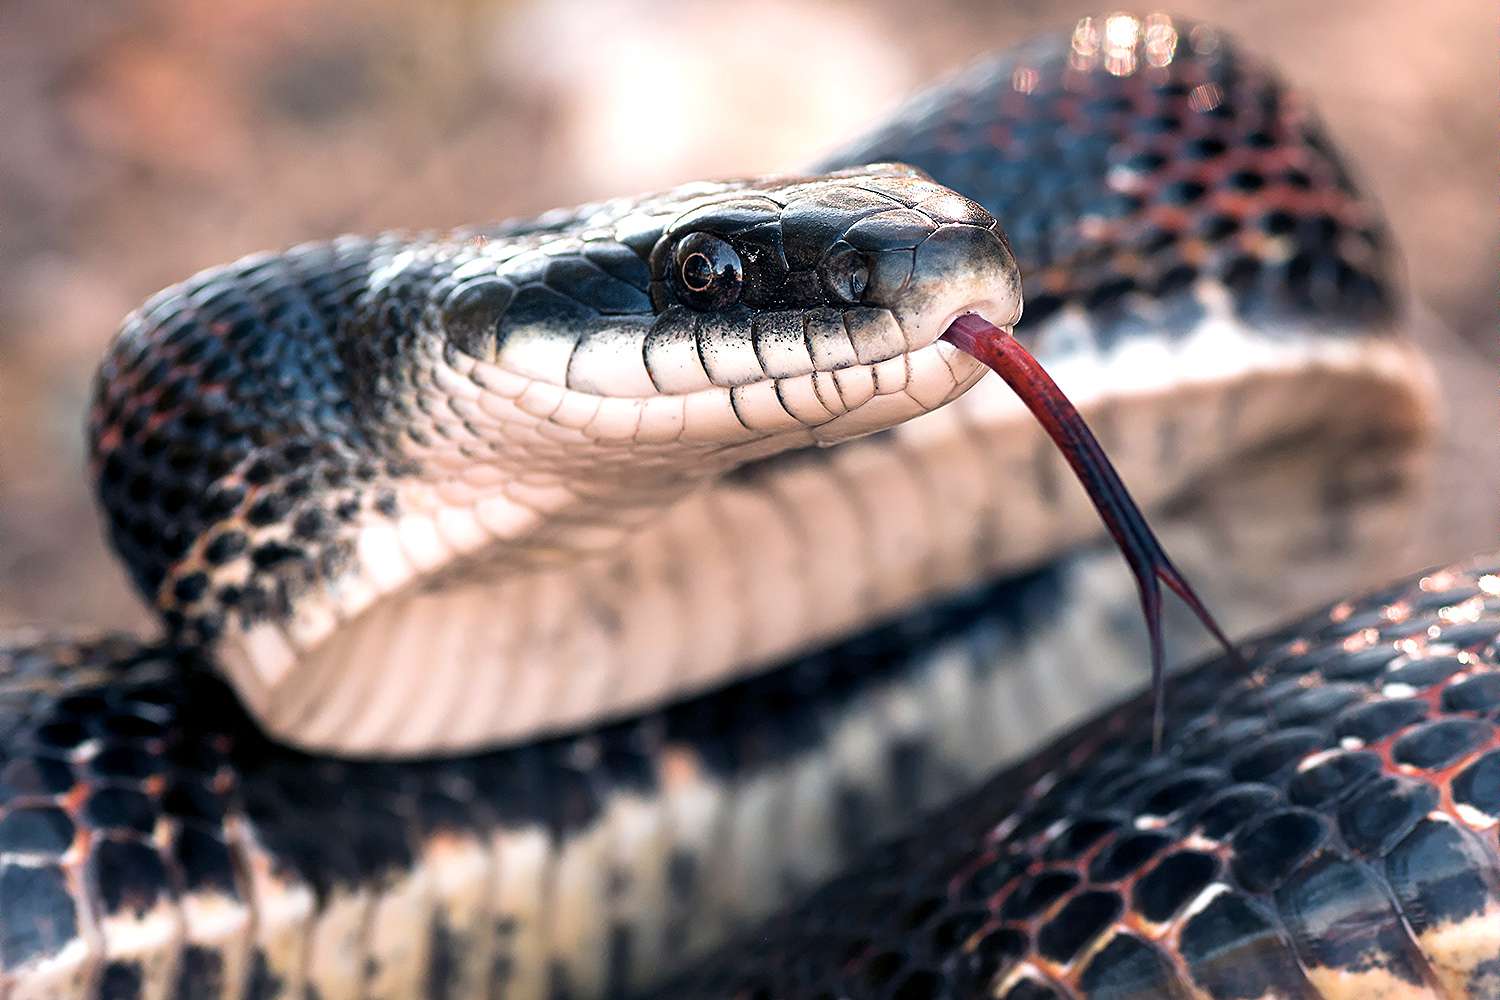 Snakes Cause 'Unprecedented' Power Outages in Tenn. by Repeatedly Sneaking into a Substation